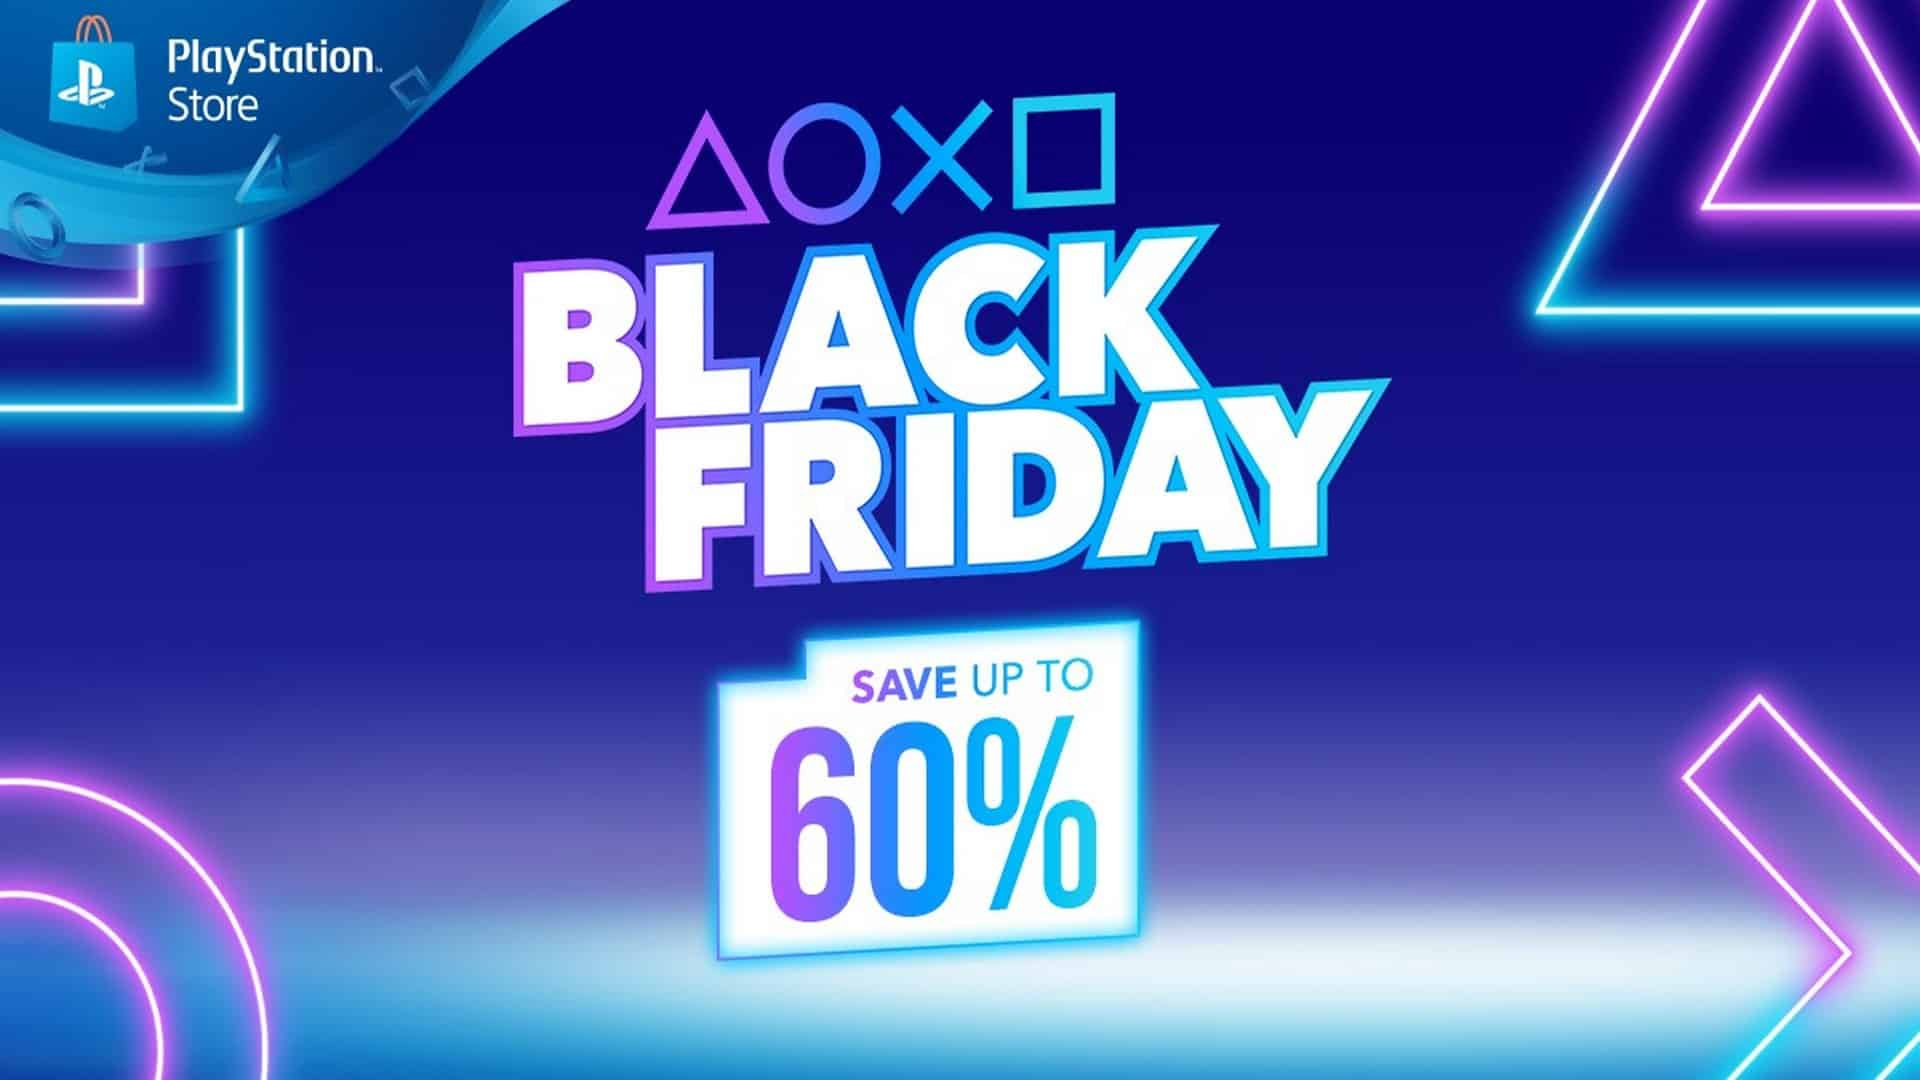 Hey Look, a Black Friday Advert Has Appeared on the PS4's Dashboard - Does Psa Do Black Friday Deals